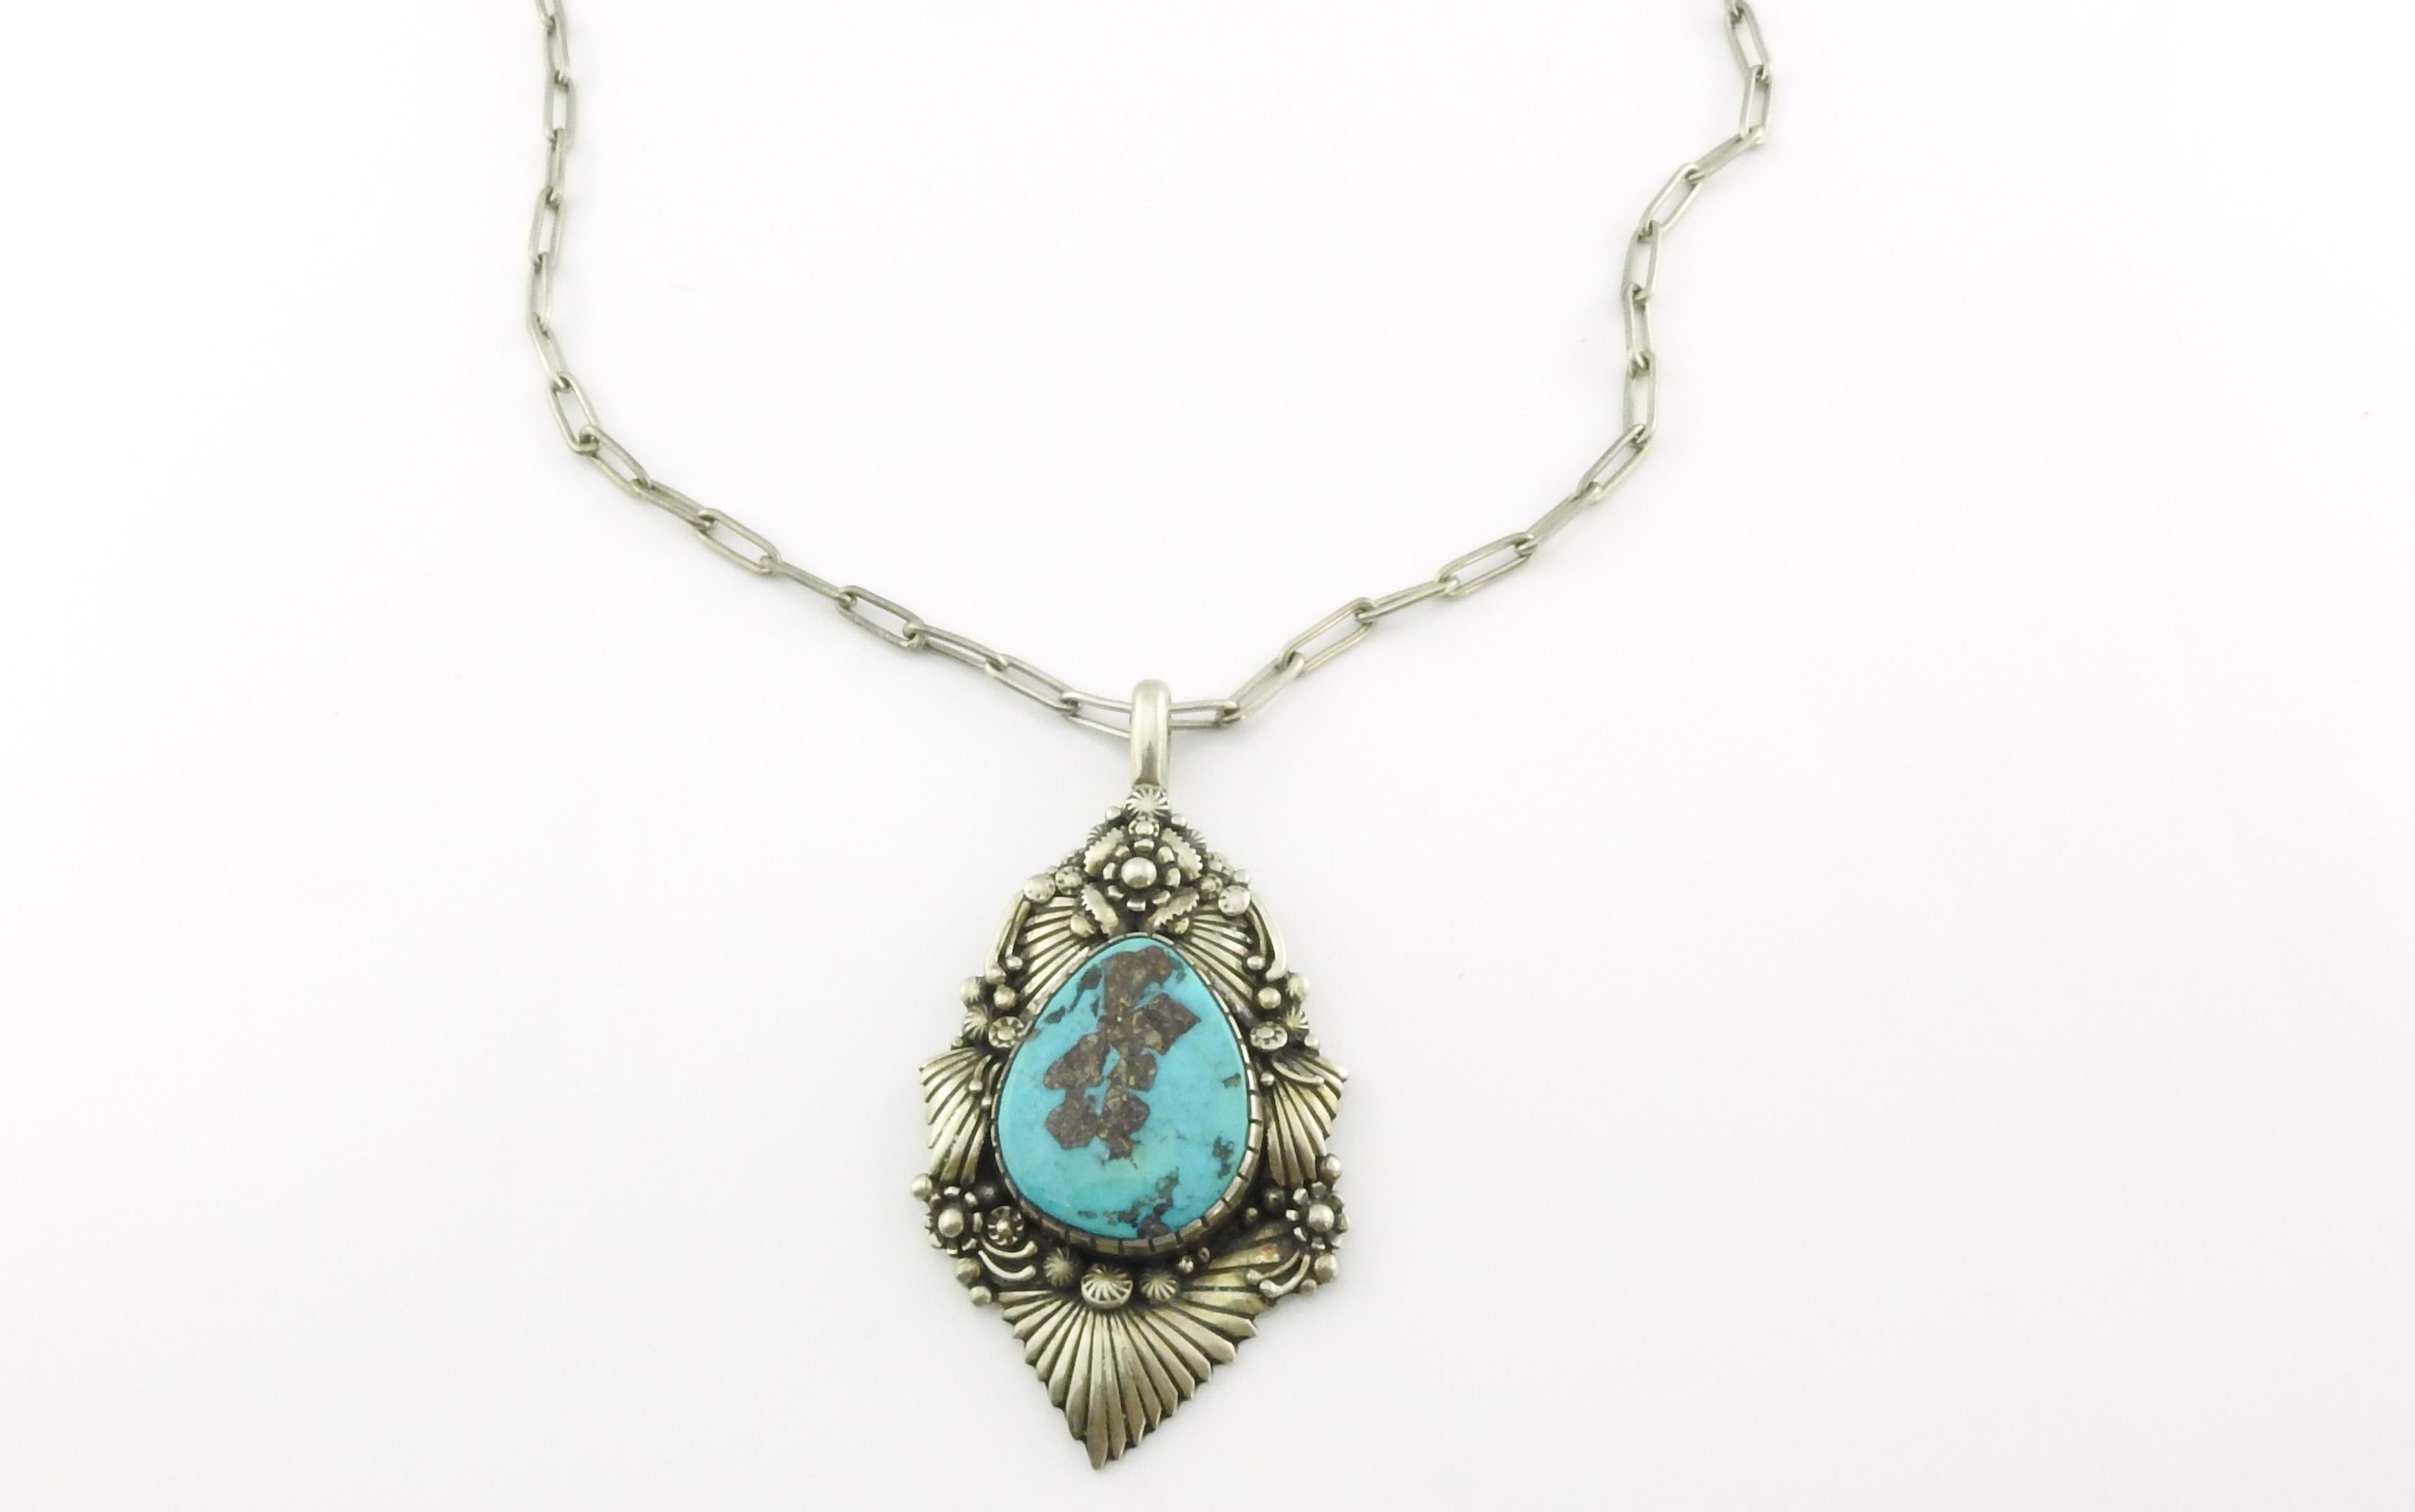 Clem Nalwood Navajo silver and turquoise pendant necklace.

Marked: NALWOOD.

Pendant Measures 3 1/4